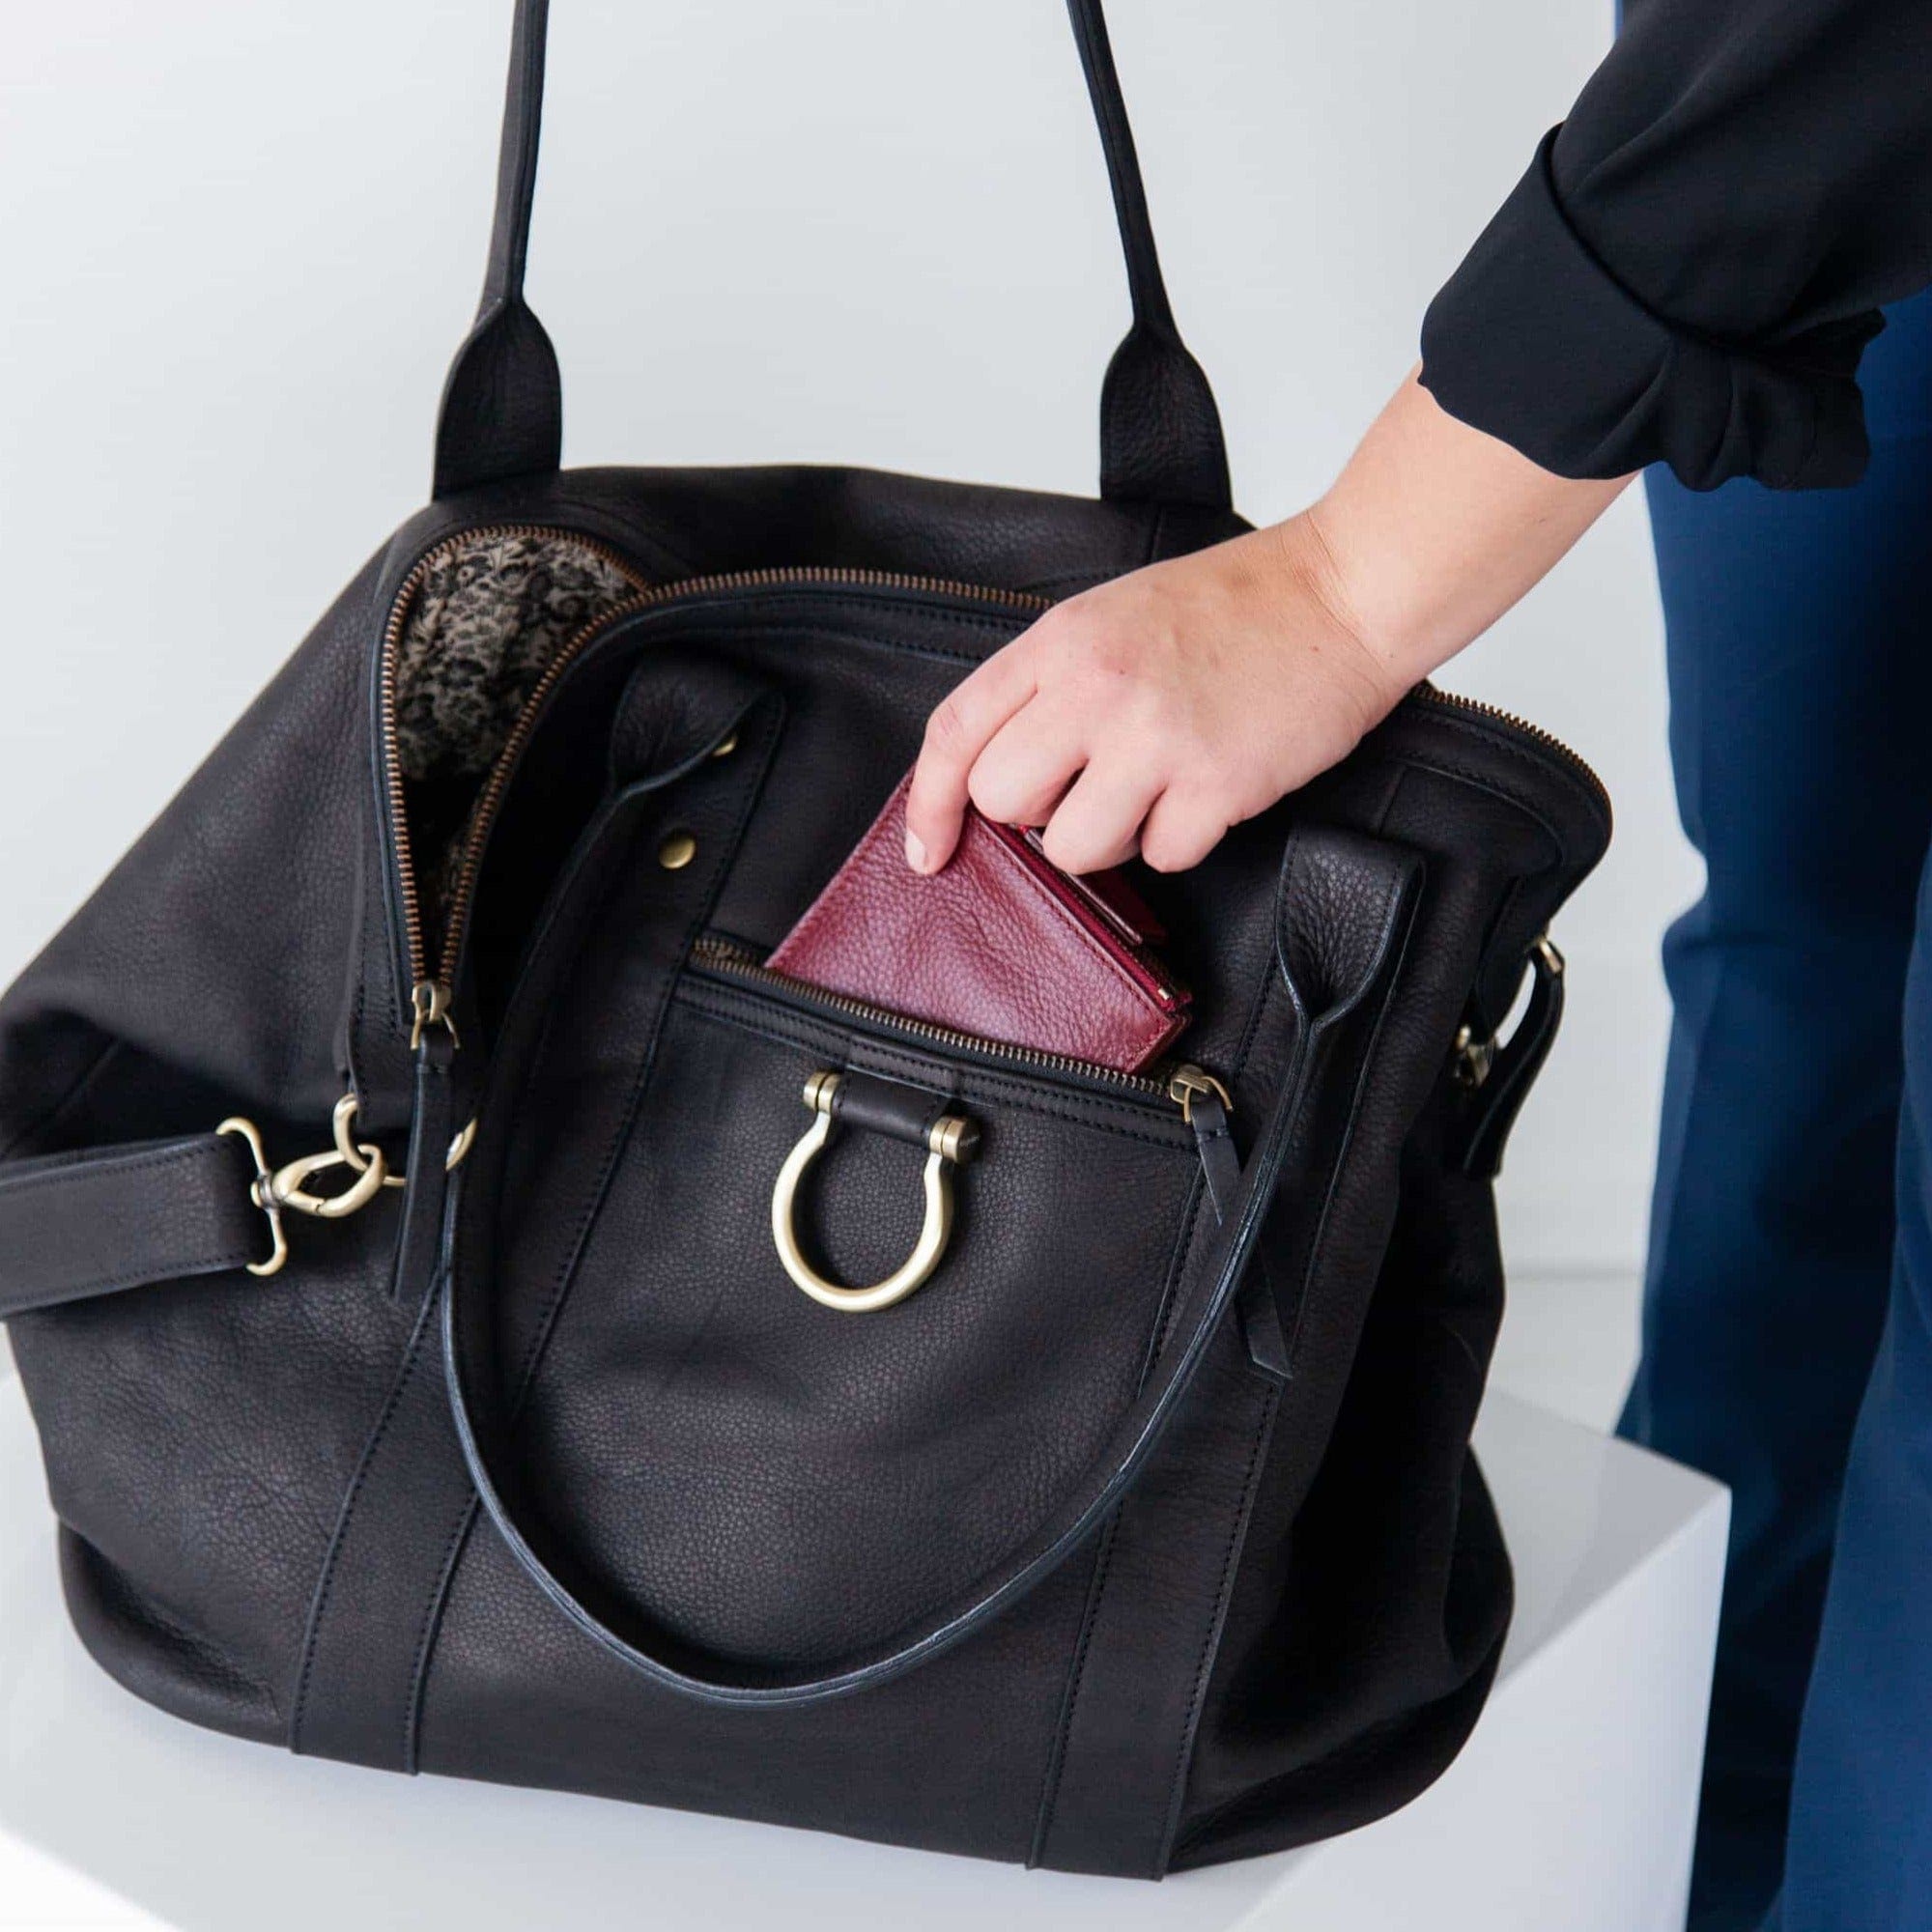 The So Honey weekender in black raw leather features an external zip pocket for quick-grab items.